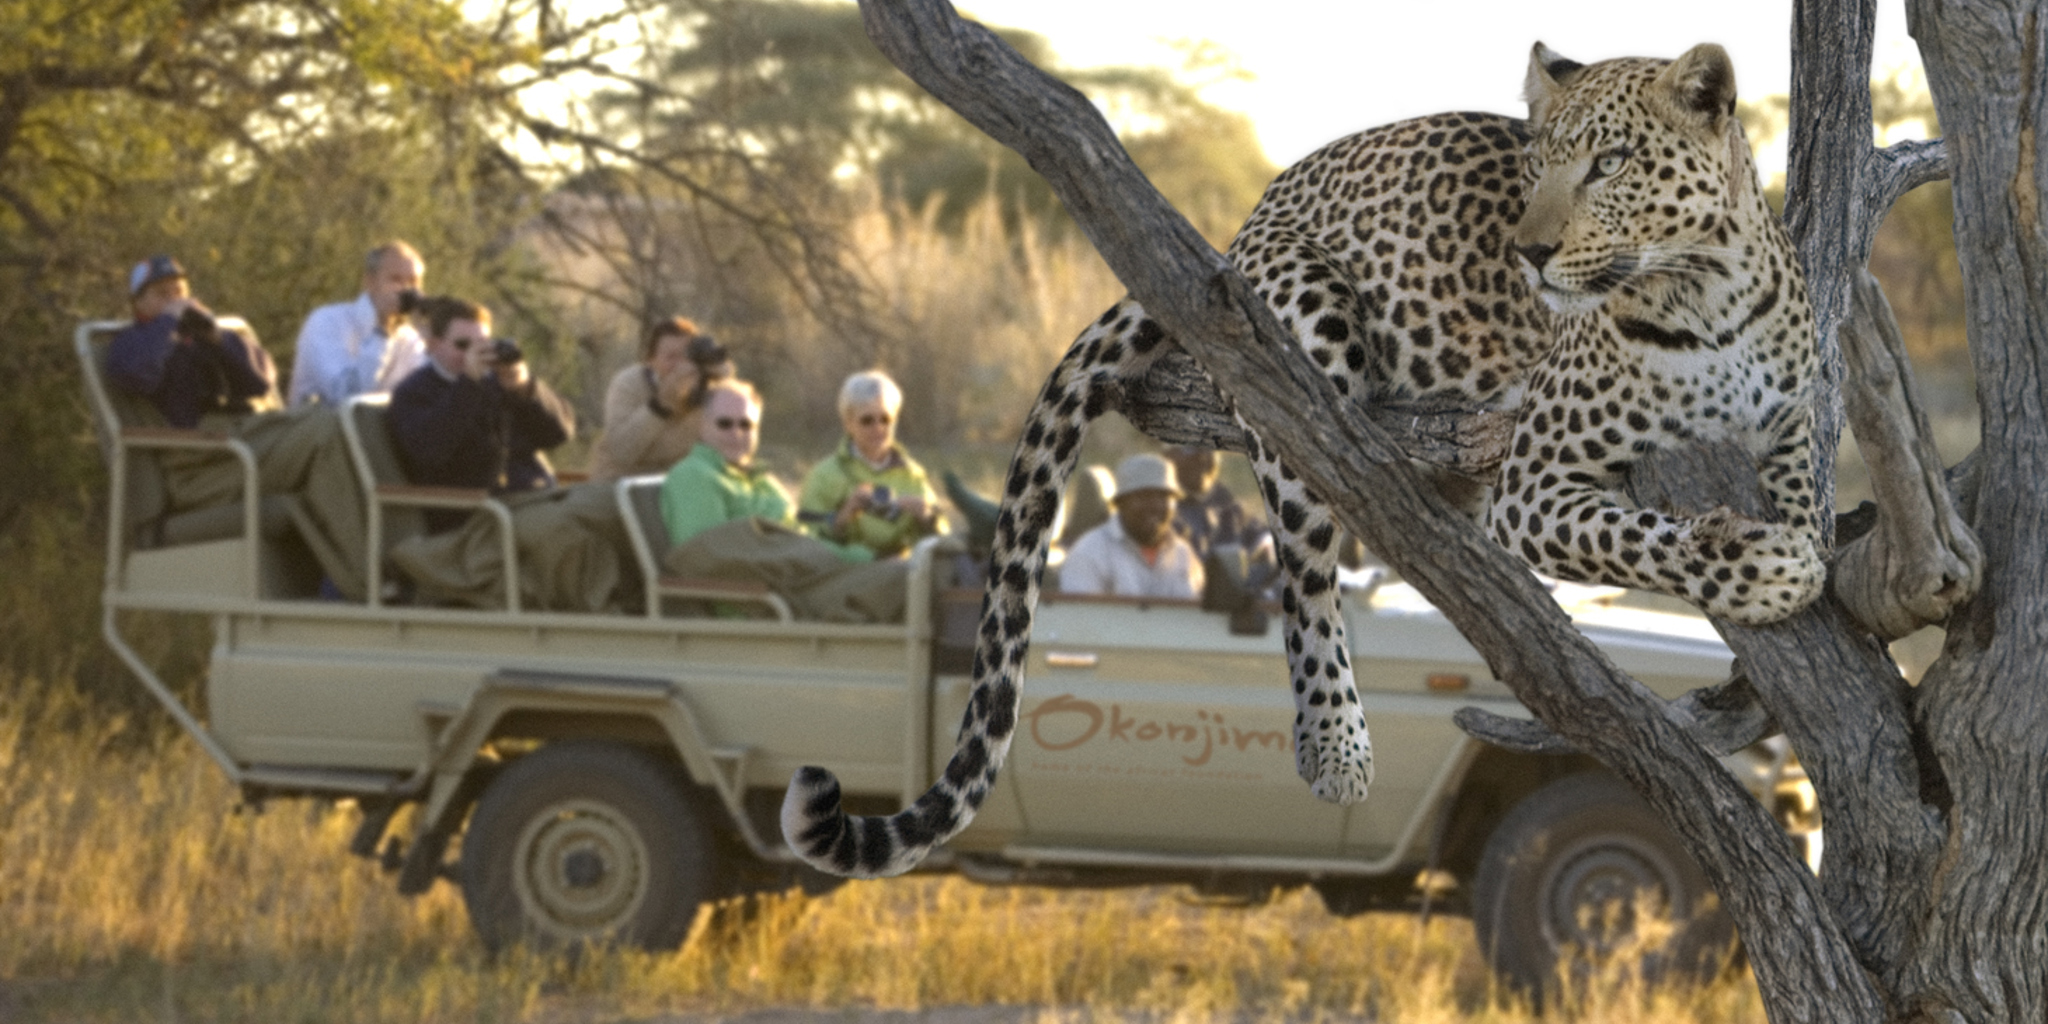 leopard game drive, central namibia safari vacations